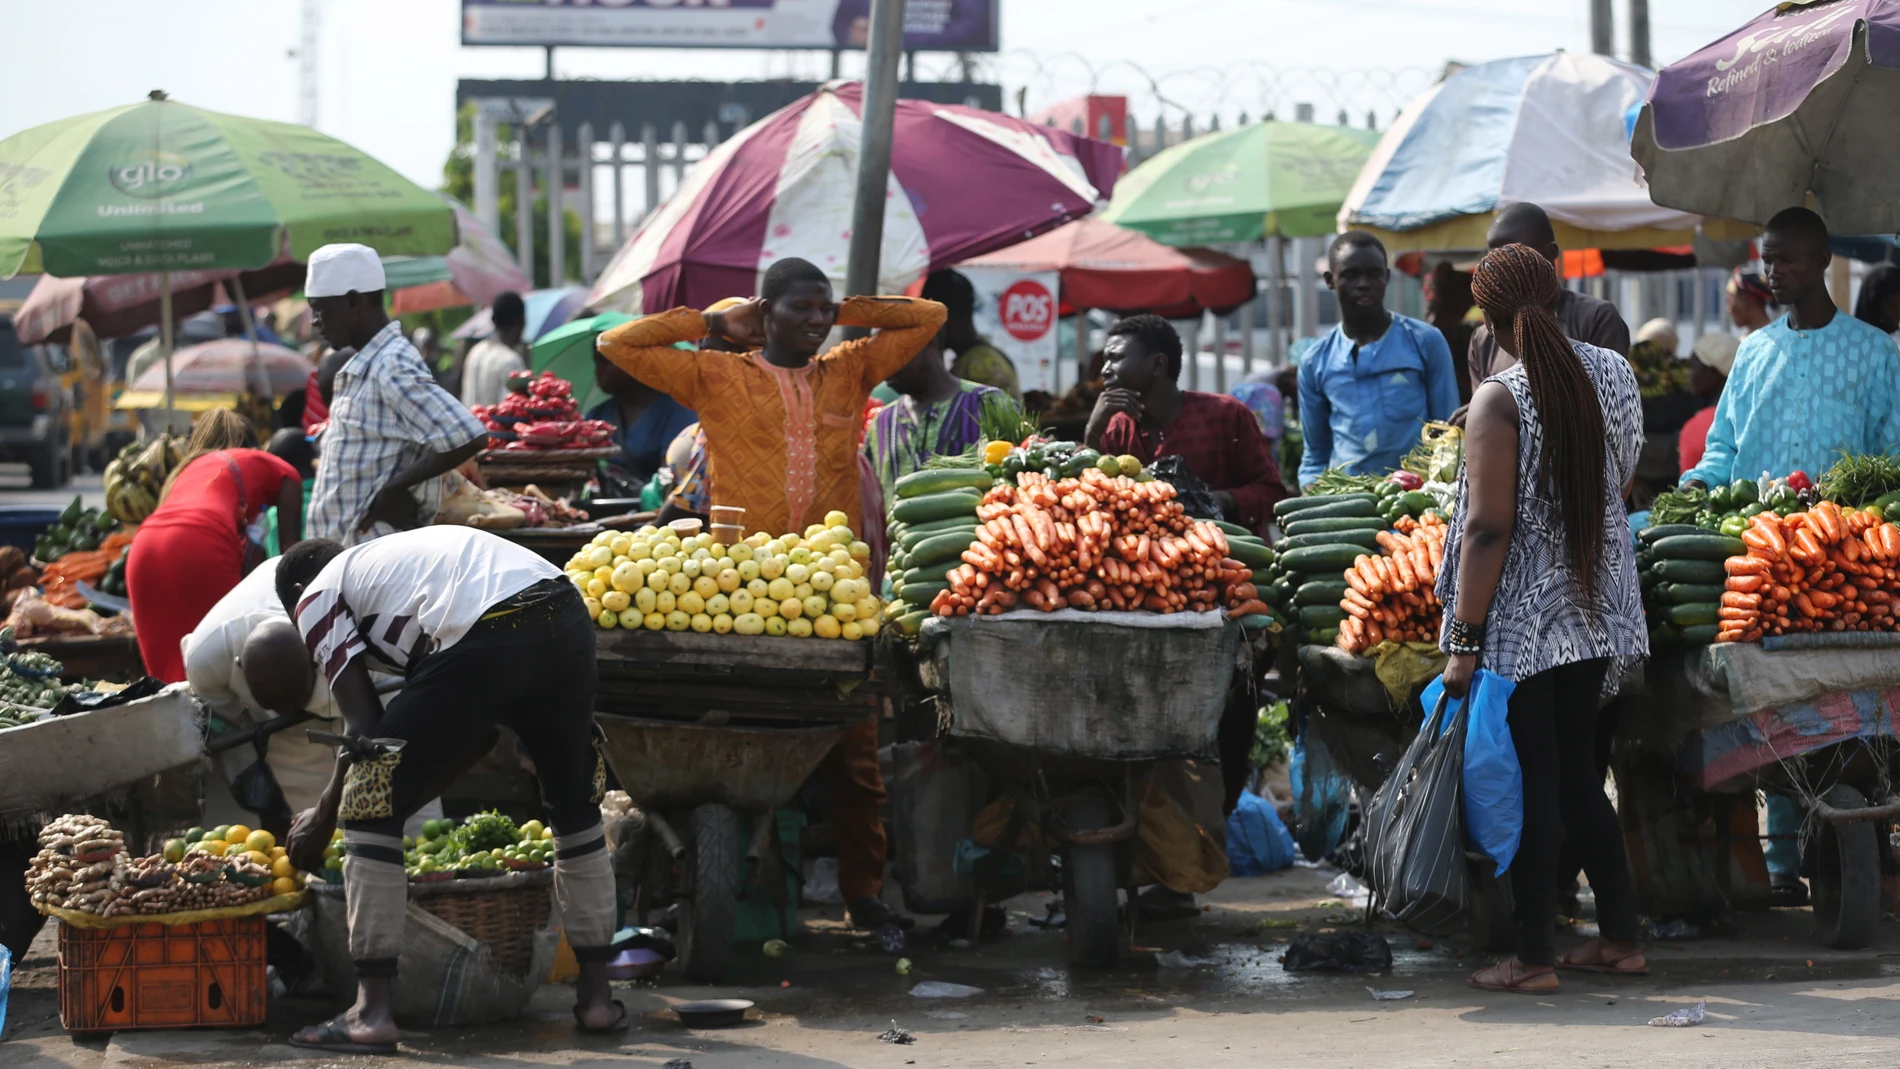 Lagos (Nigeria), 08/02/2023.- Fruit sellers wait for customers at a roadside market in the Ojodu district in Lagos, Nigeria, 08 February 2023. The Central Bank of Nigeria on 26 October 2022, announced the introduction of redesigned 200, 500 and 1,000 naira notes into the financial system. But since the notes were unveiled, Nigerians across different parts of the country have had a hard time accessing it from banks and ATM points, affecting the costs of food and transportation. (Elecciones) EF...